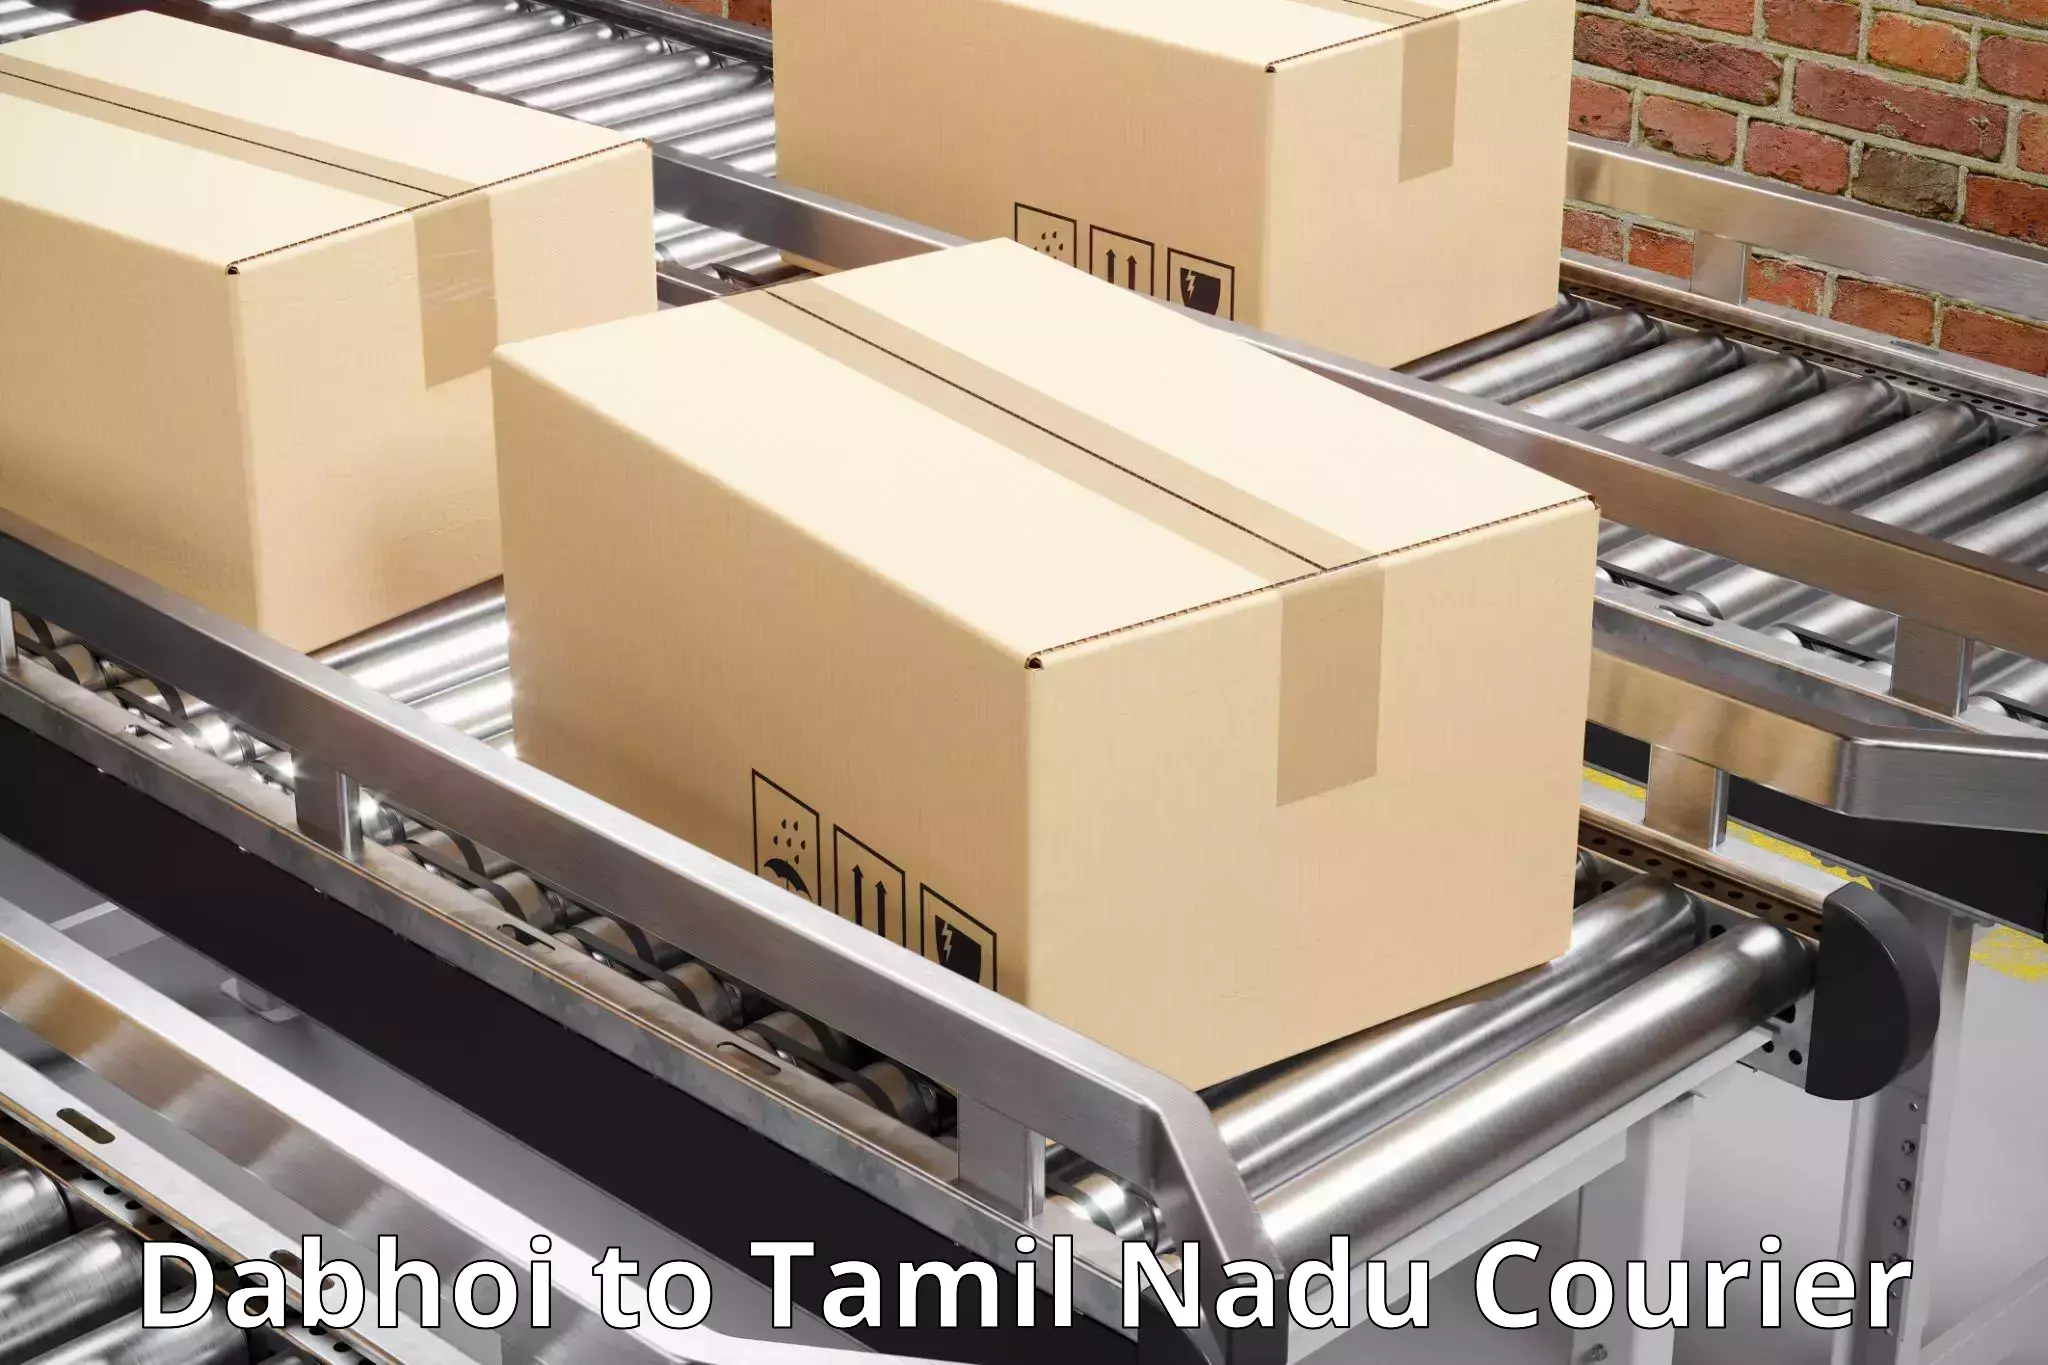 Courier insurance Dabhoi to Ennore Port Chennai